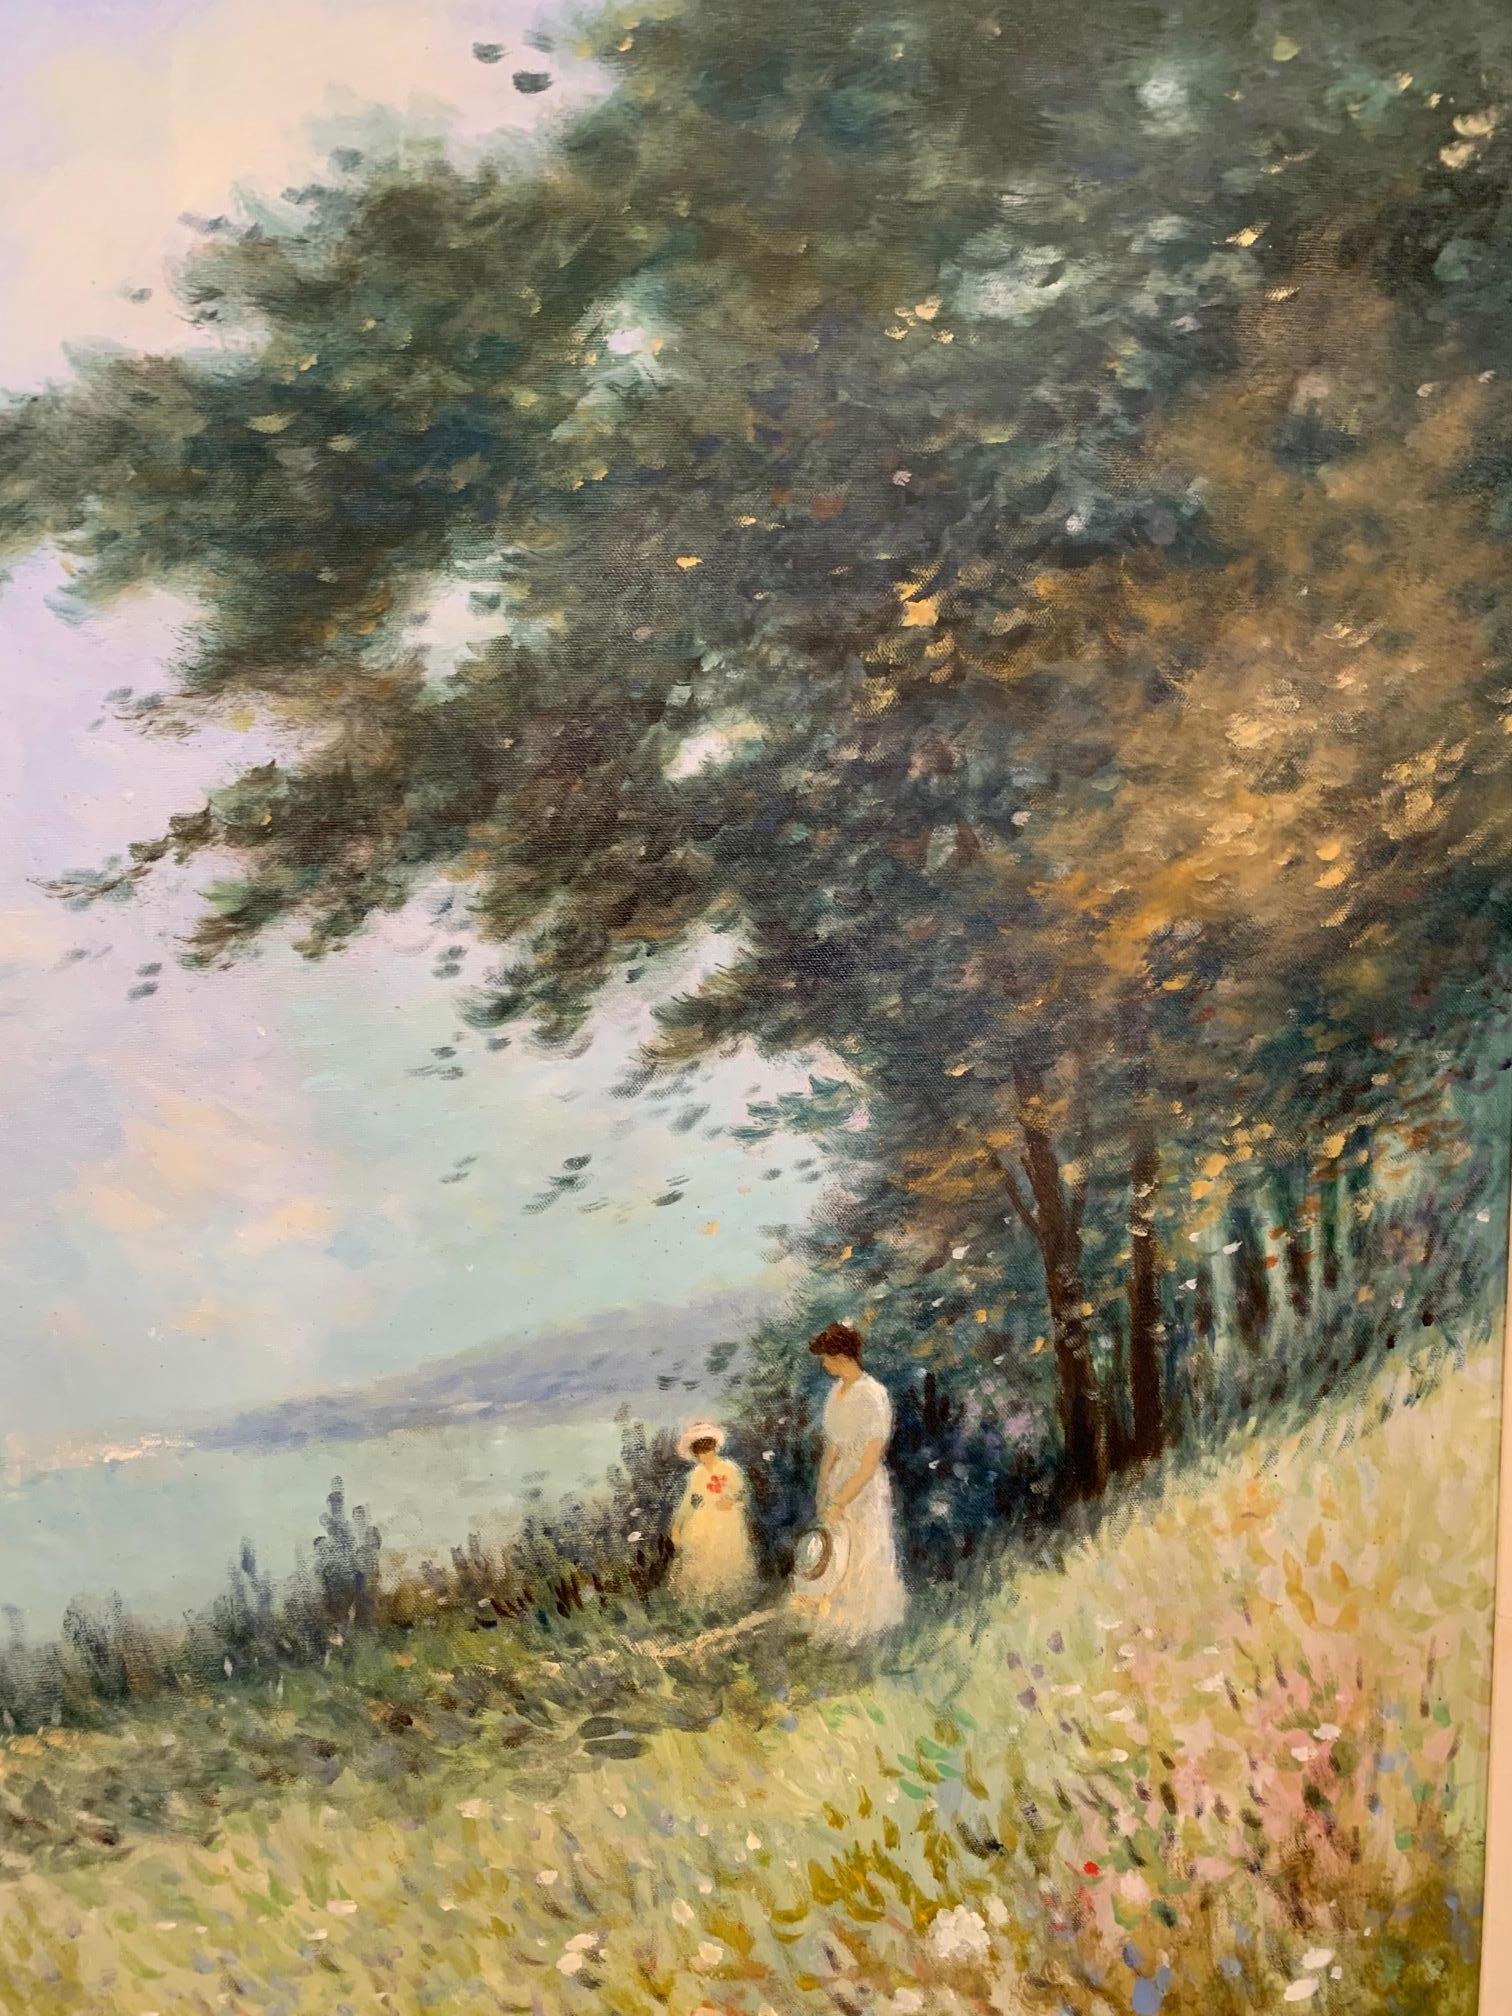 Magnificent large impressionist original landscape in the style of Monet, having two old fashioned ladies in white gowns strolling in a bucolic flower filled field with sailboats in the distance.
Canvas is 36” x 48
Framed 43” H x 55” W x